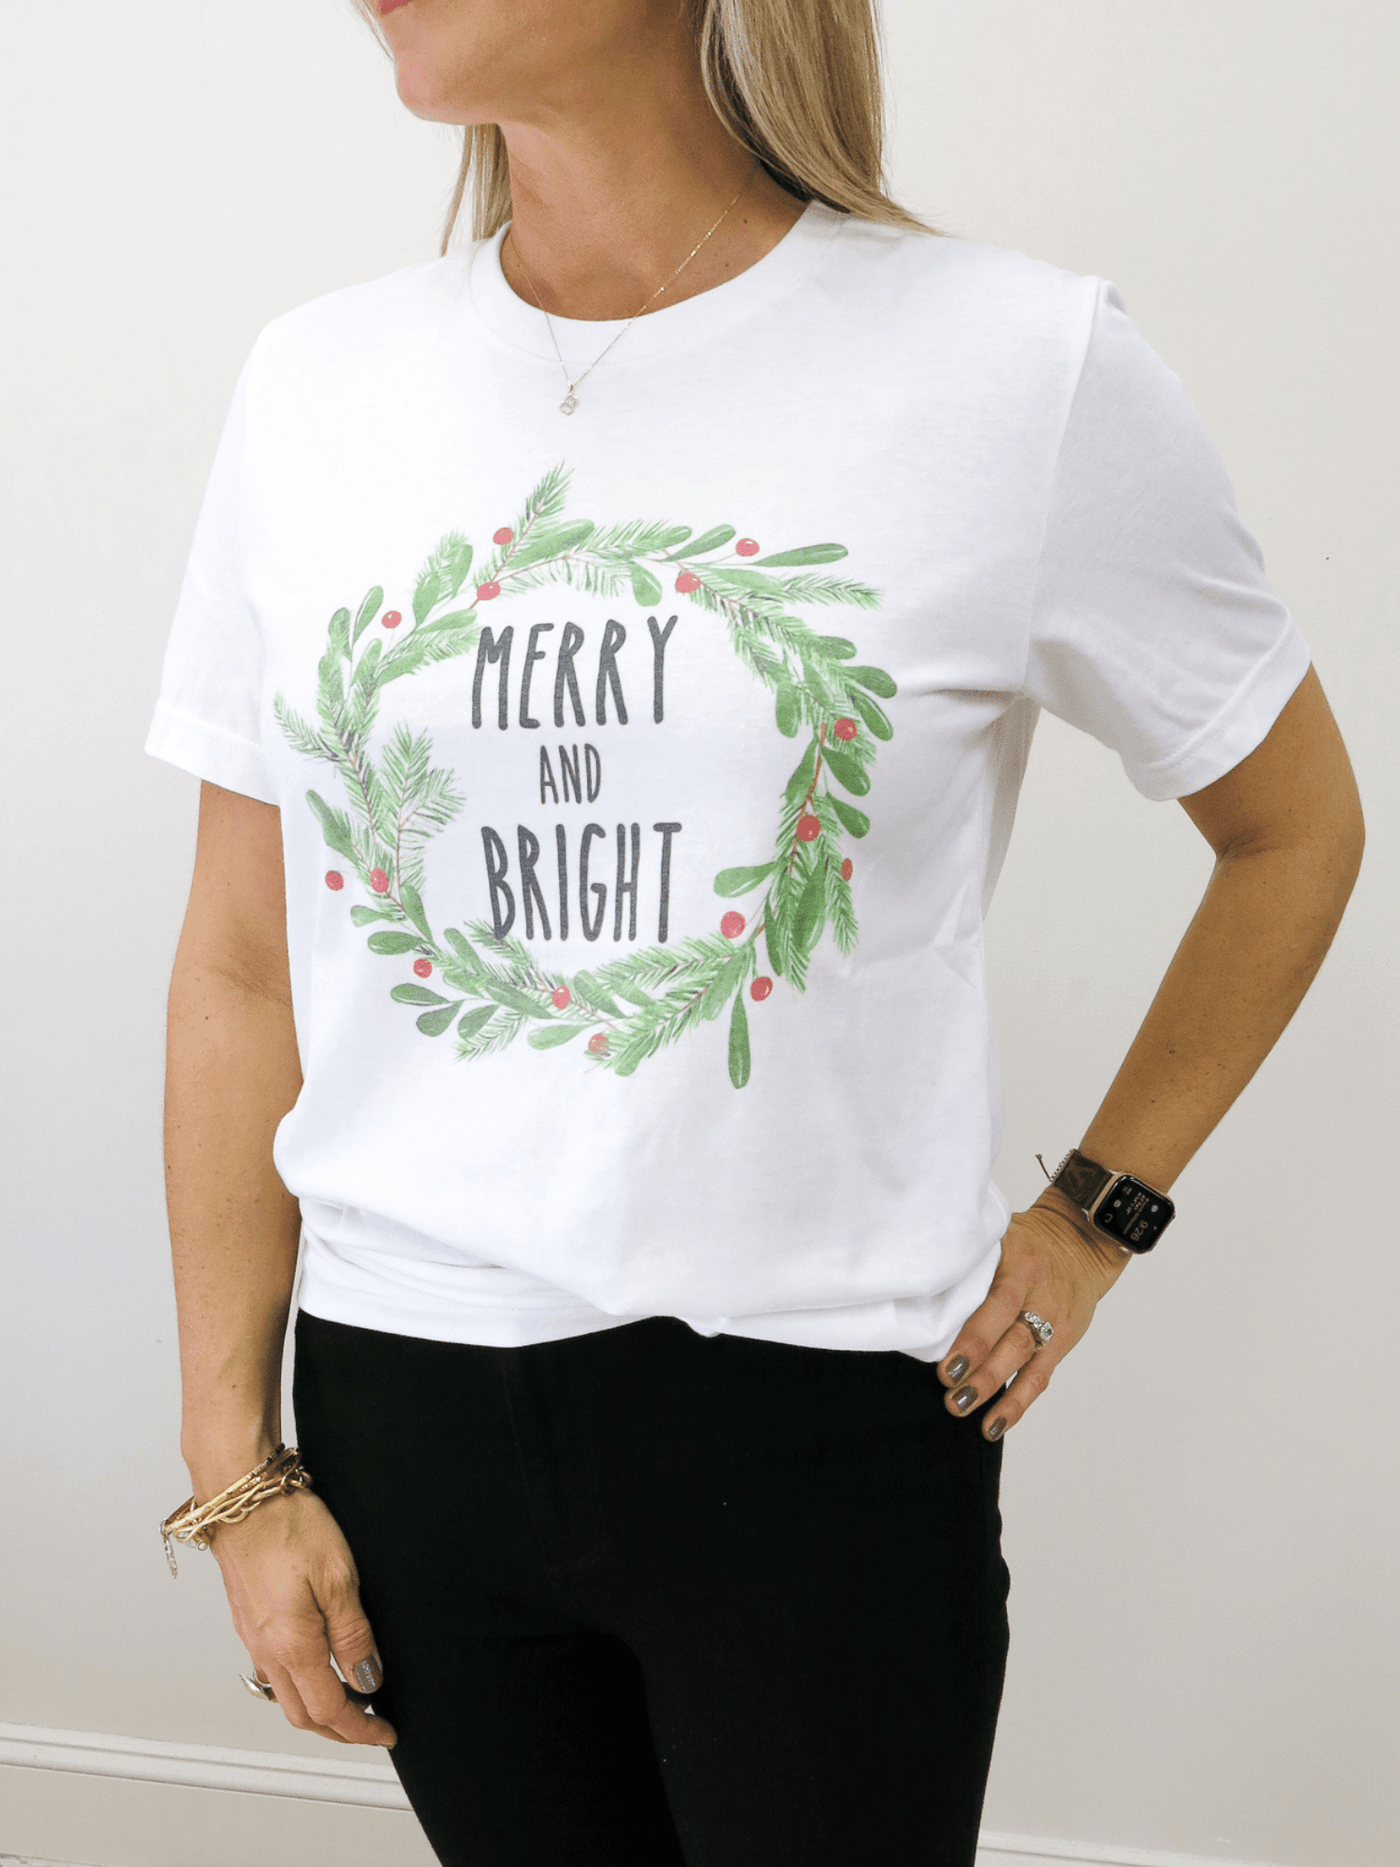 Merry and Bright tee with holly.